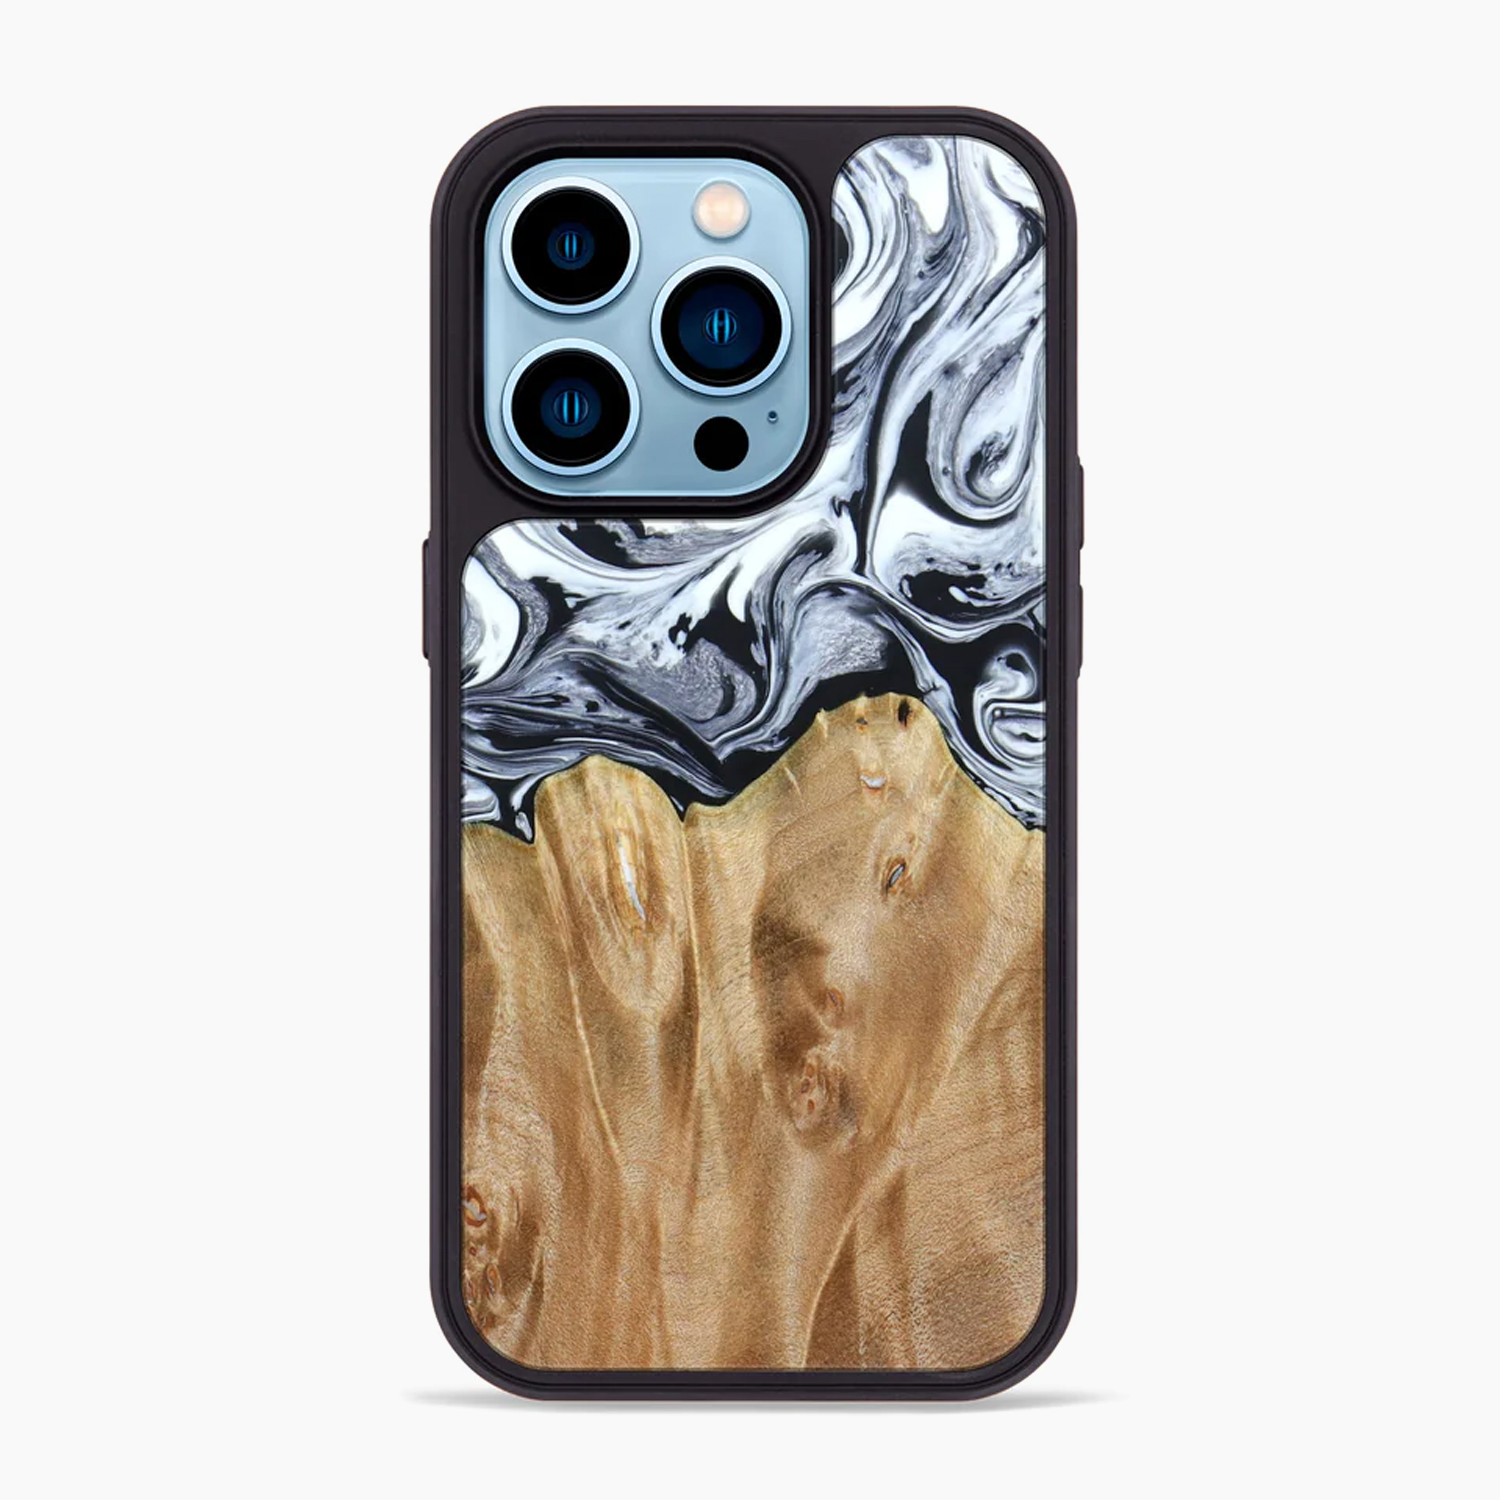 FDGG23 Fathers Day Gift Guide Carved wood resin phone case